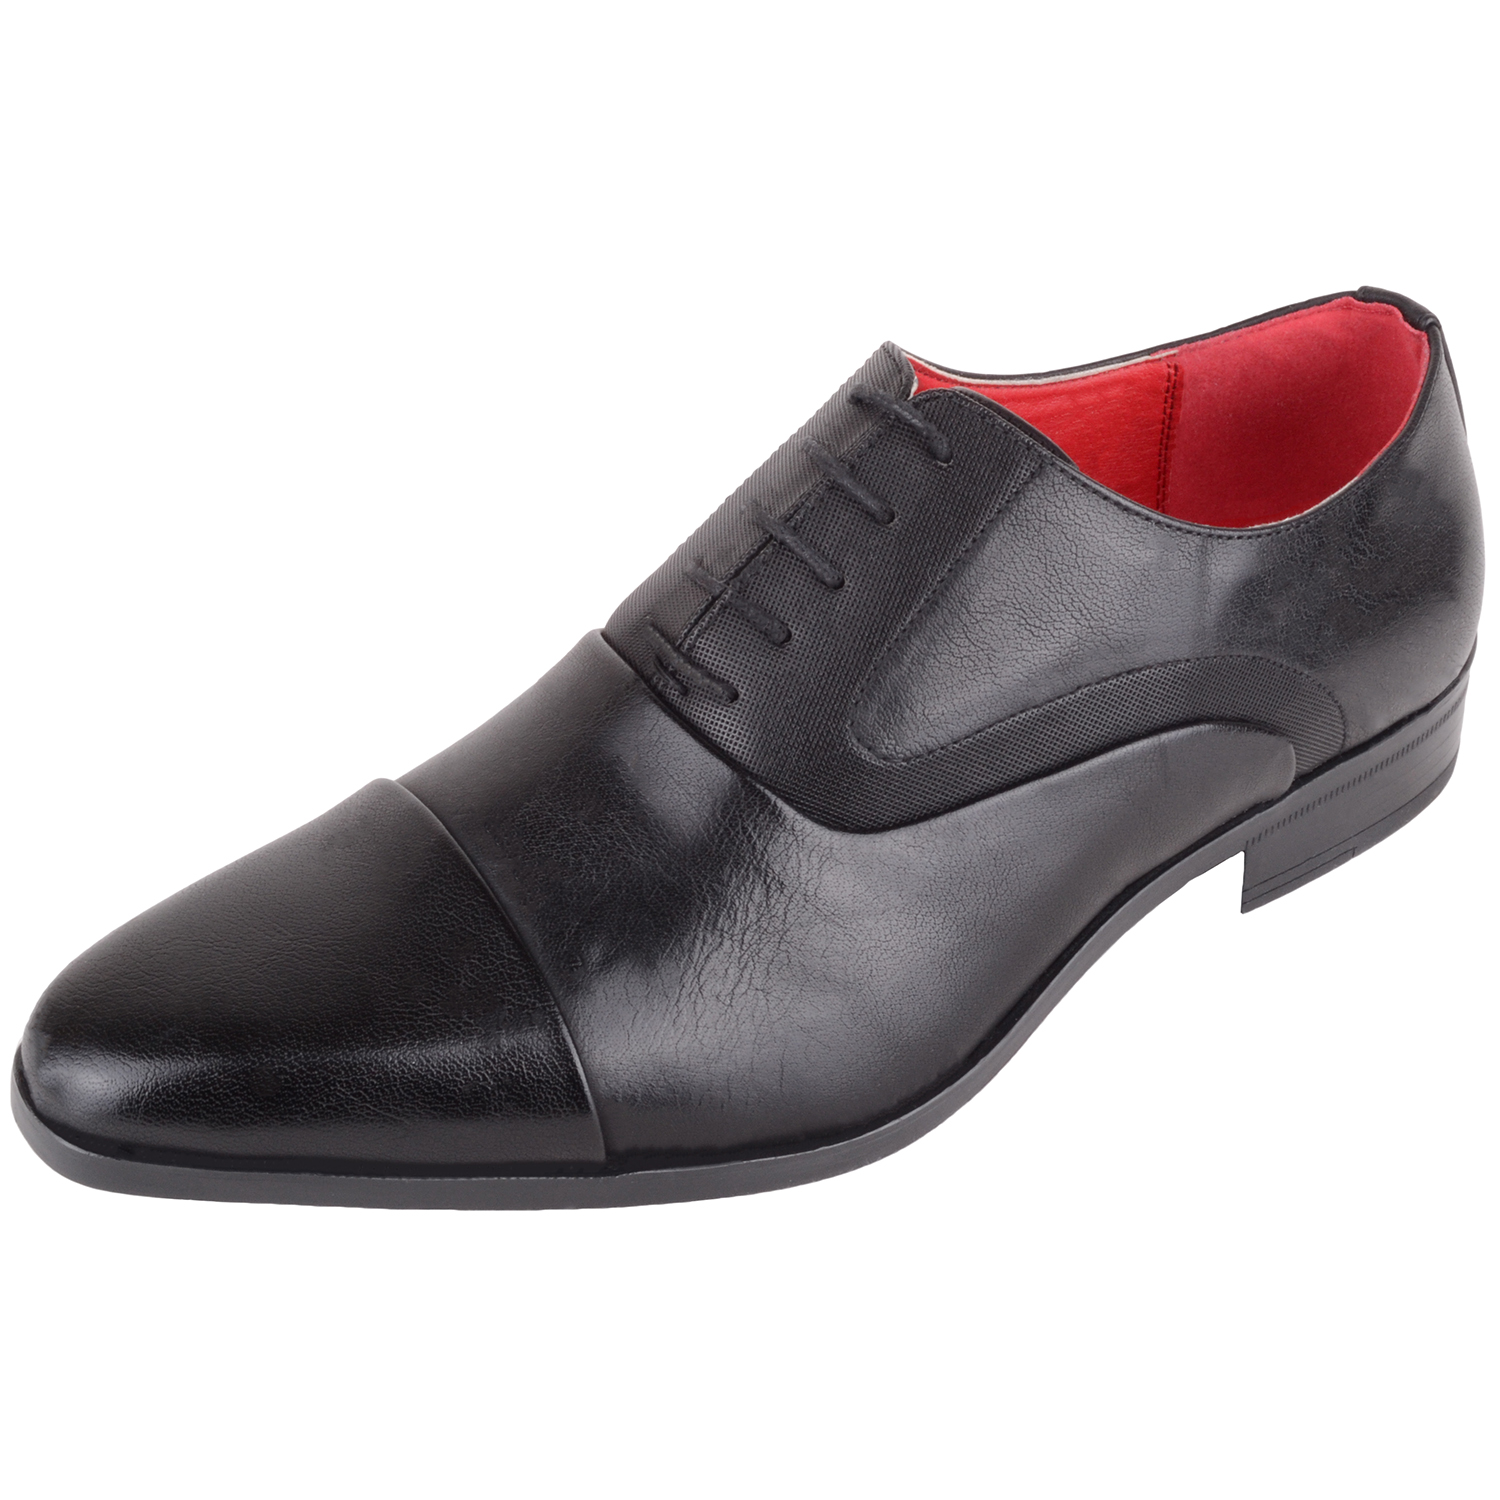 Mens Gents Lace Up Faux Leather Smart Formal Shoes (Color: Black, Size: UK 8) by Absolute Footwear